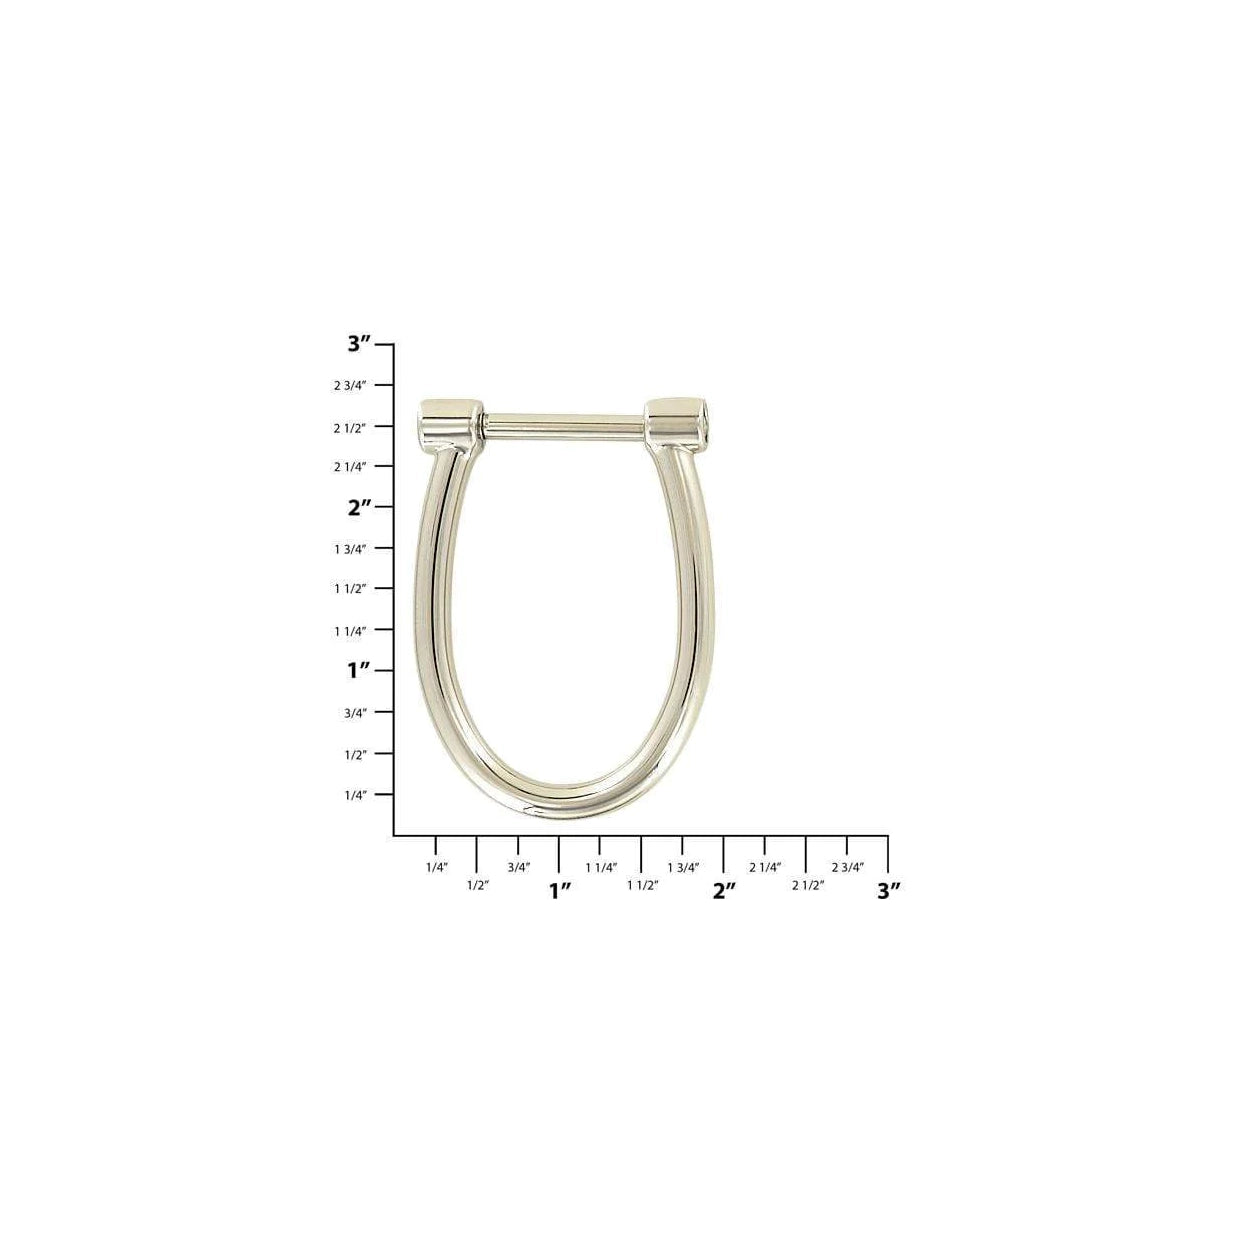 1", Shiny Nickel, Horseshoe D Ring with Screw-In Pin, Zinc Alloy, #P-2684